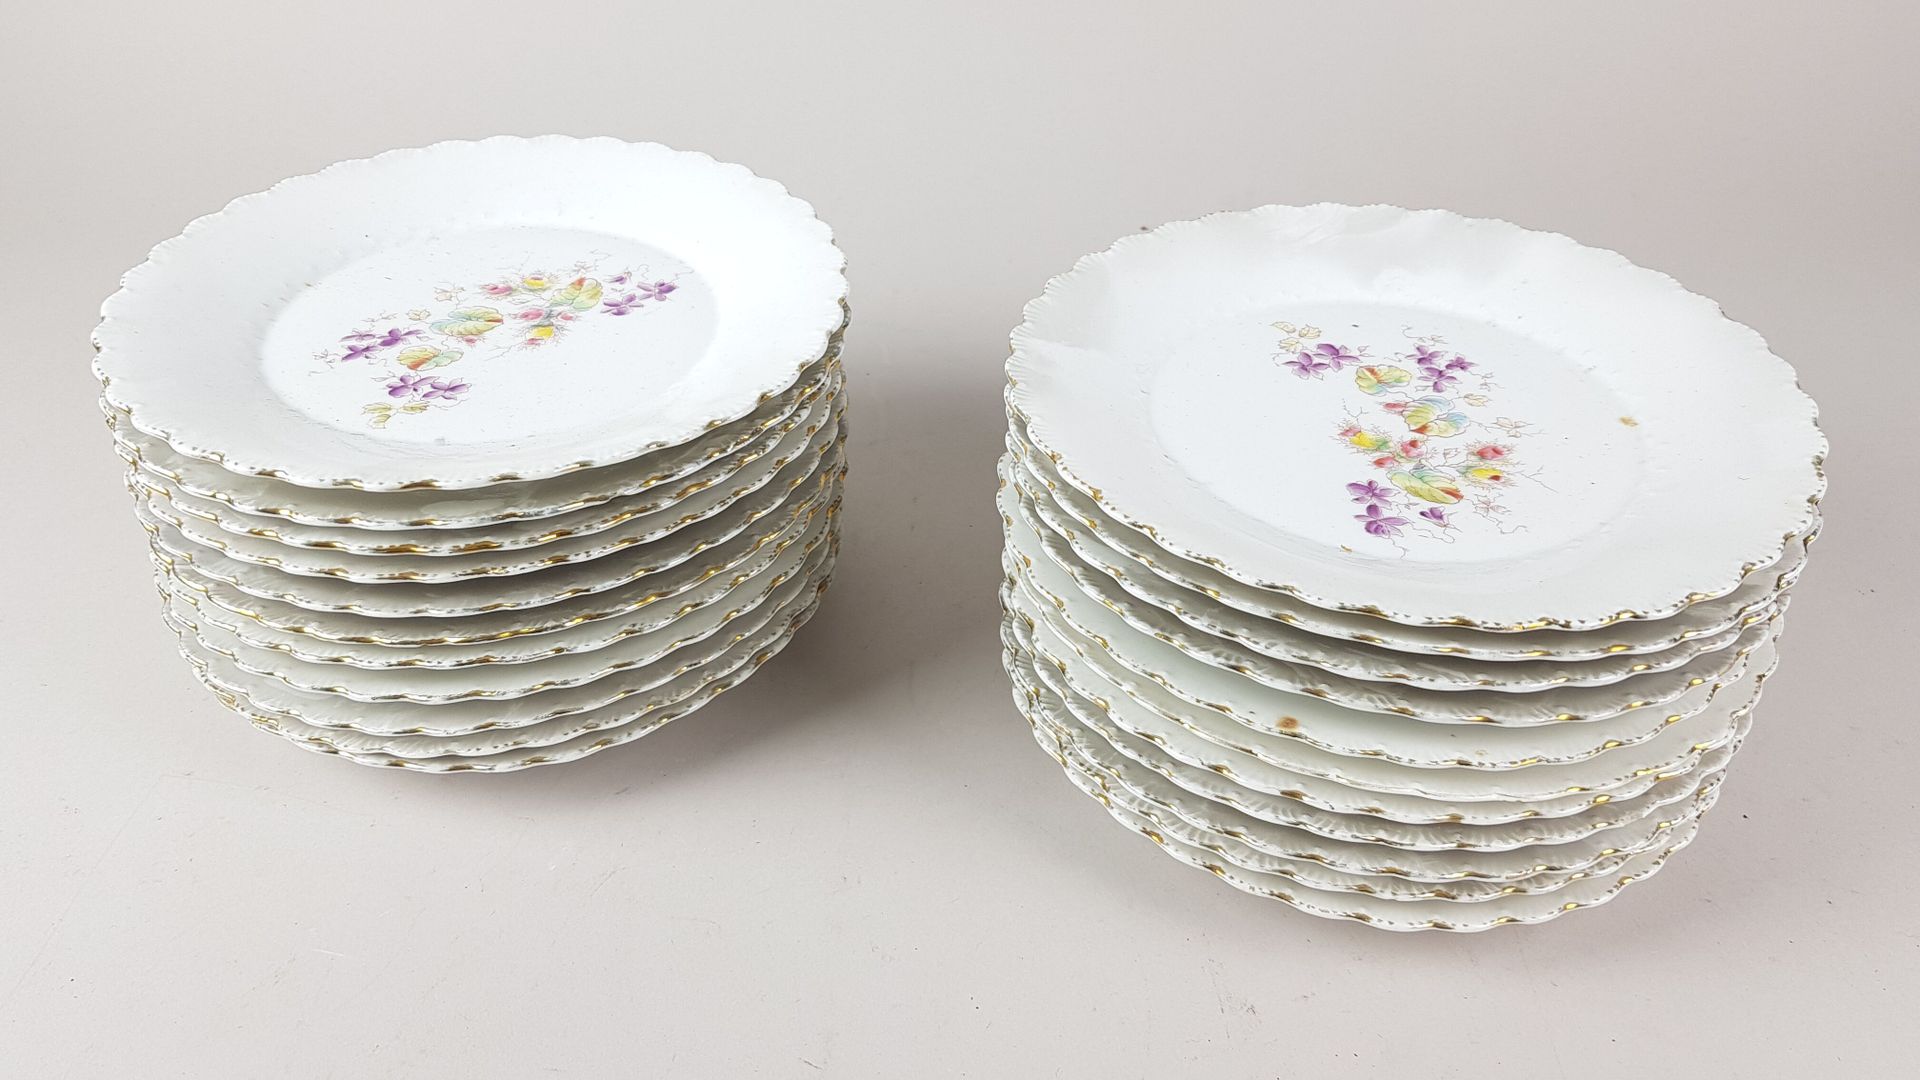 Null LOT of porcelain plates (about 20 pieces). Diam 20 cm - wear and tear